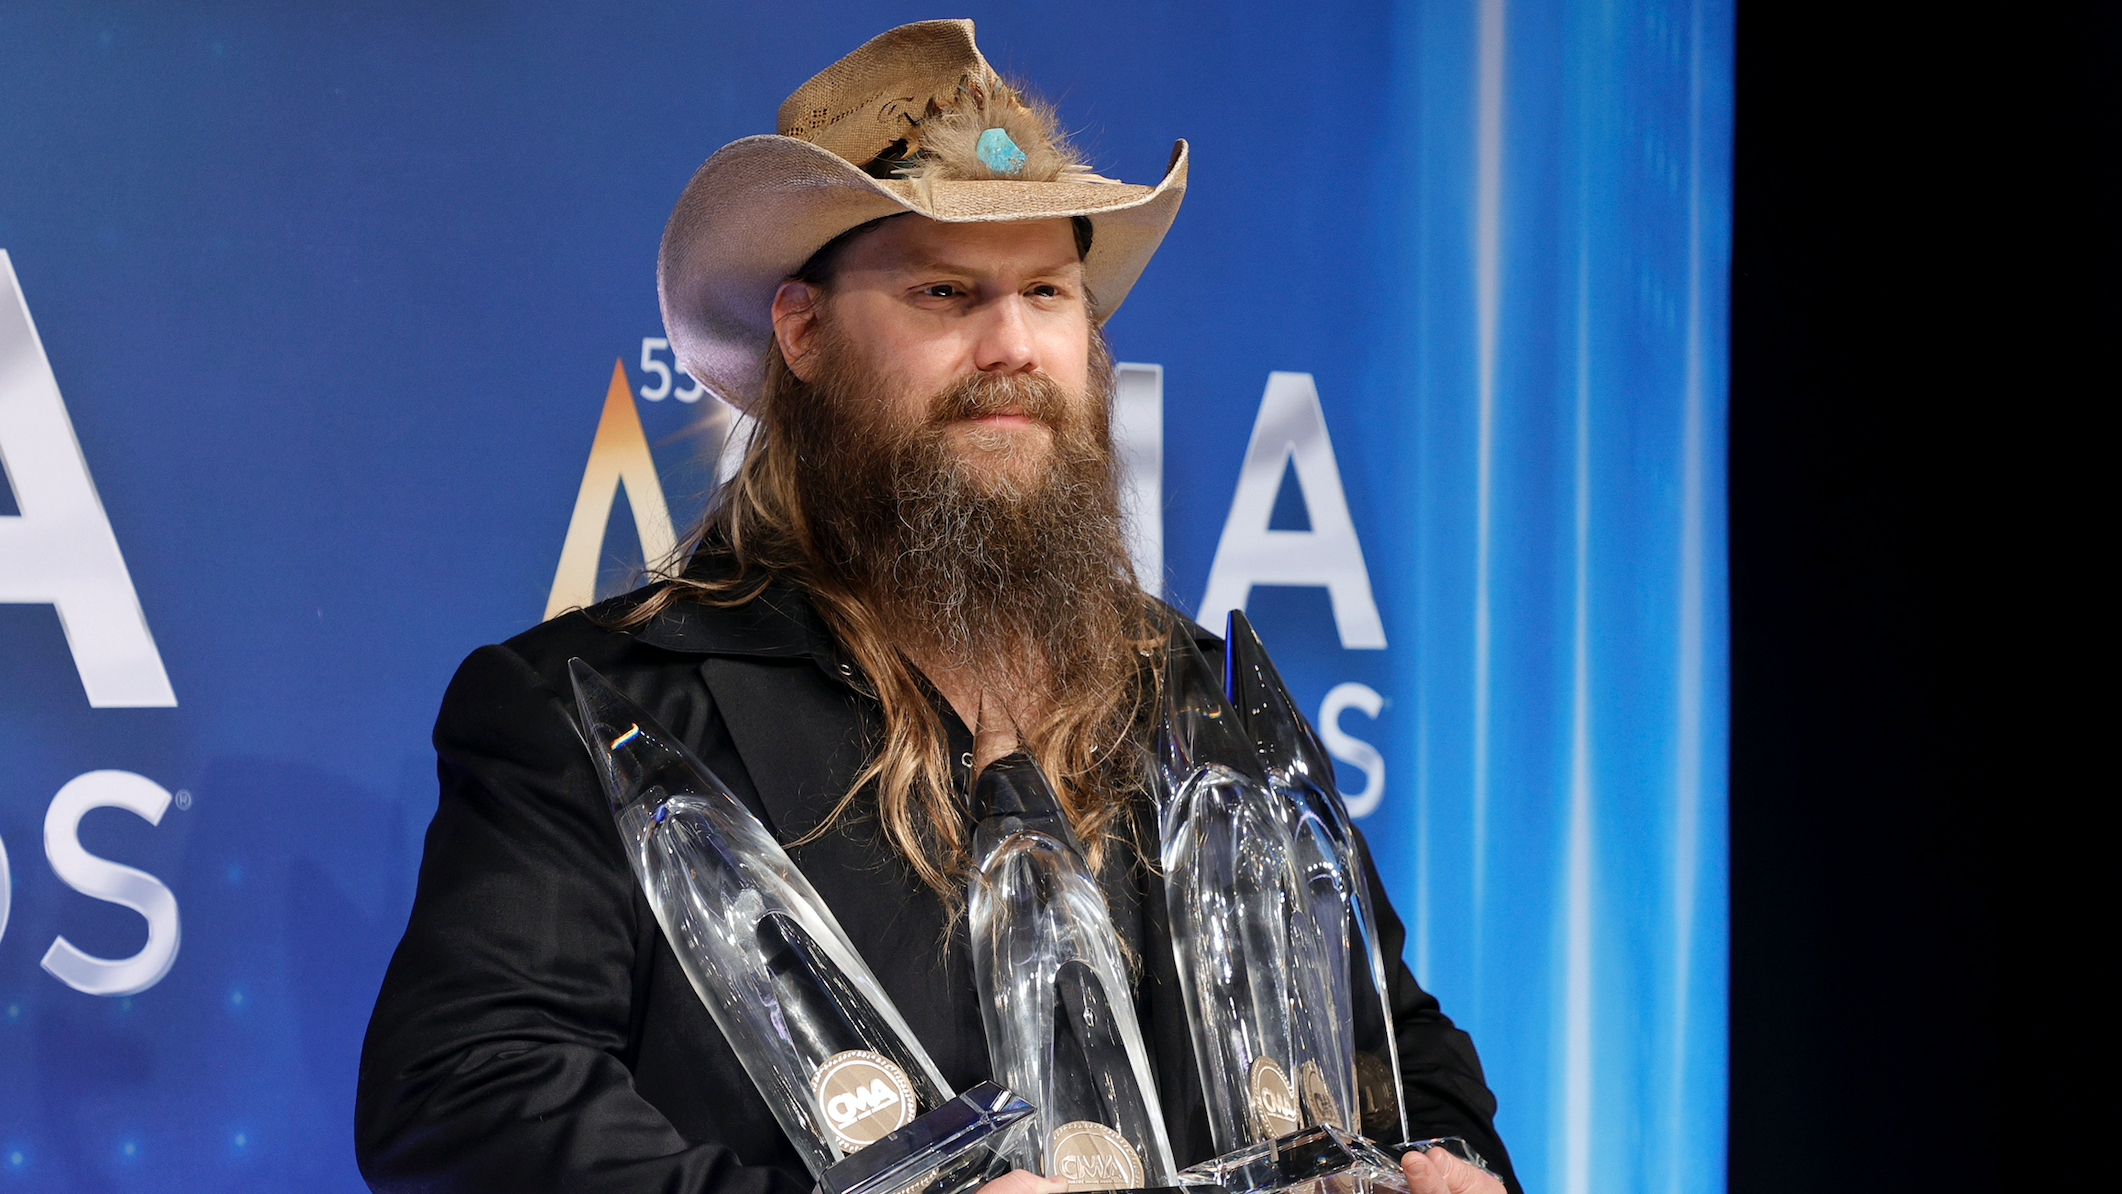 Chris Stapleton - Two years was a long time, but well